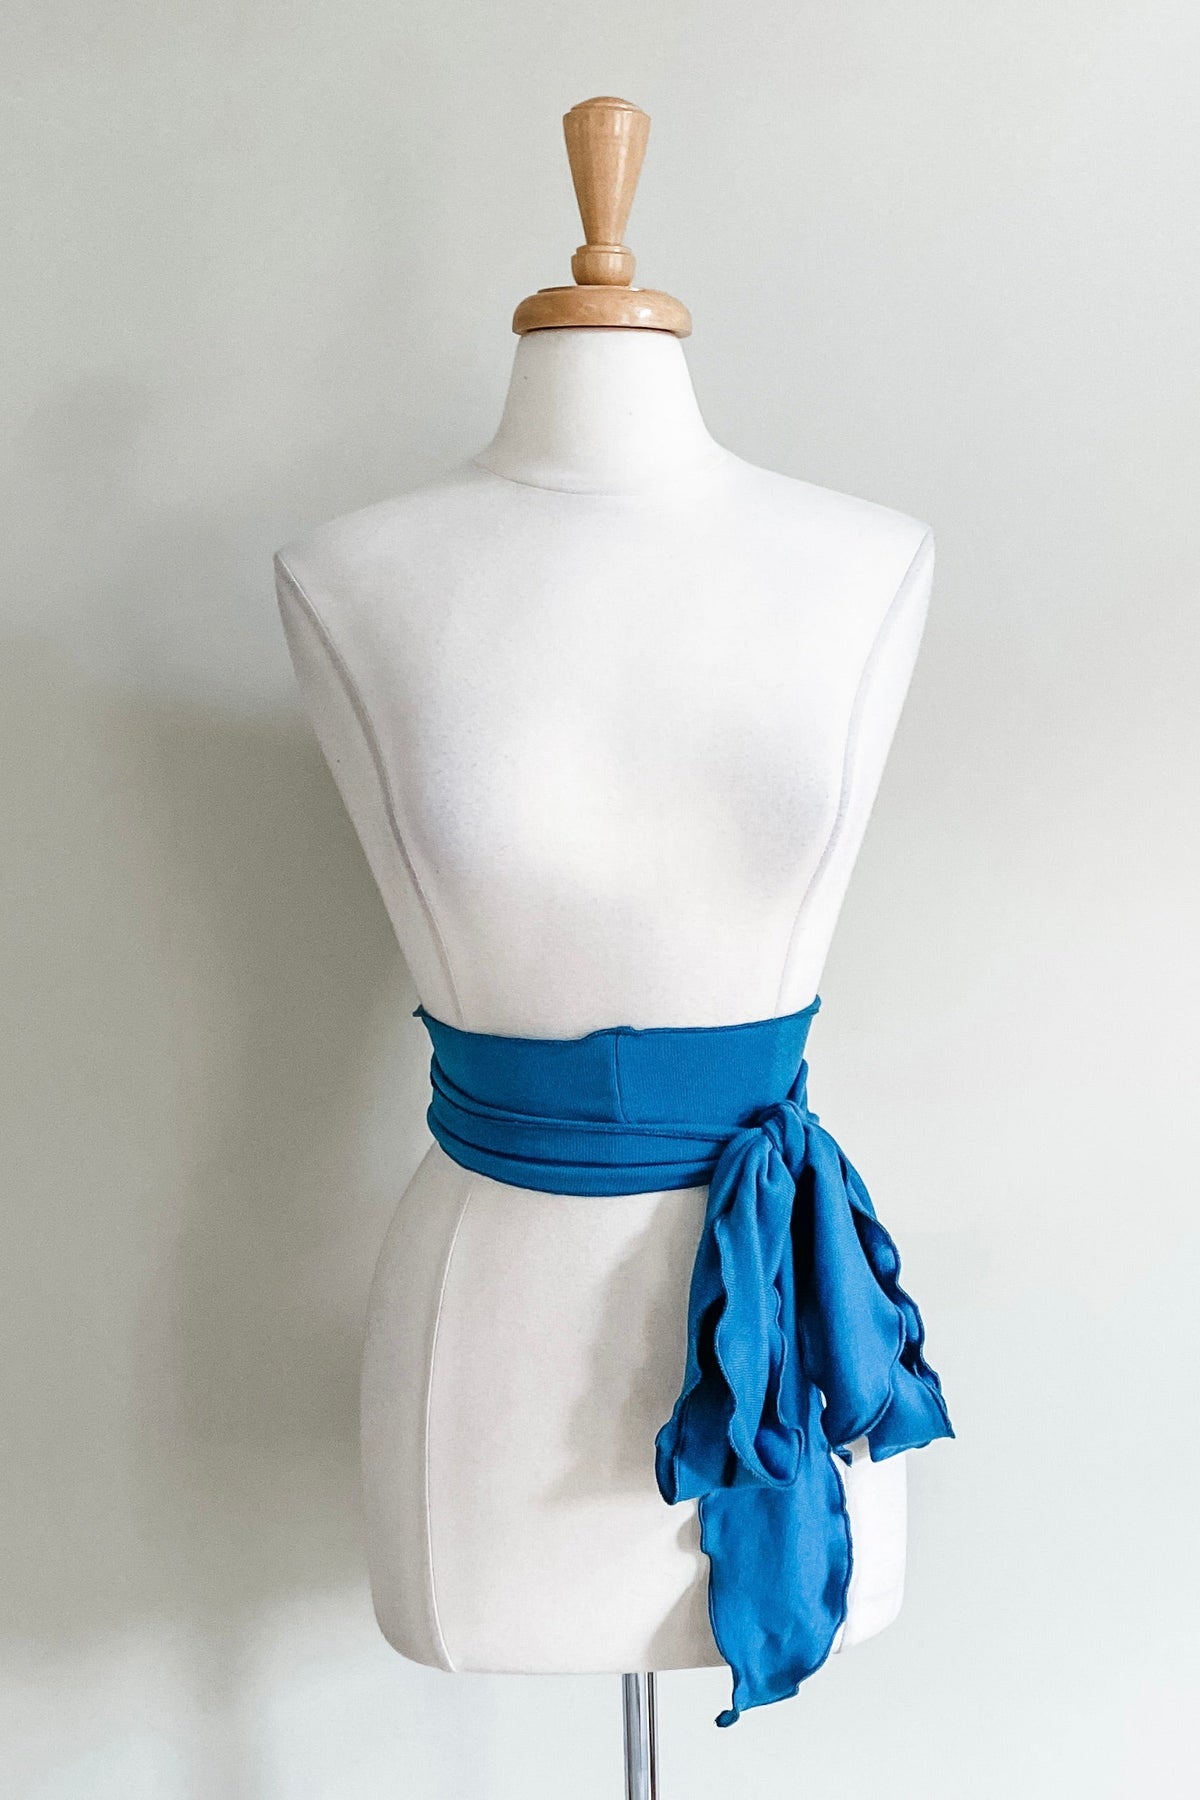 Matching Sash in Hunter color from Diane Kroe